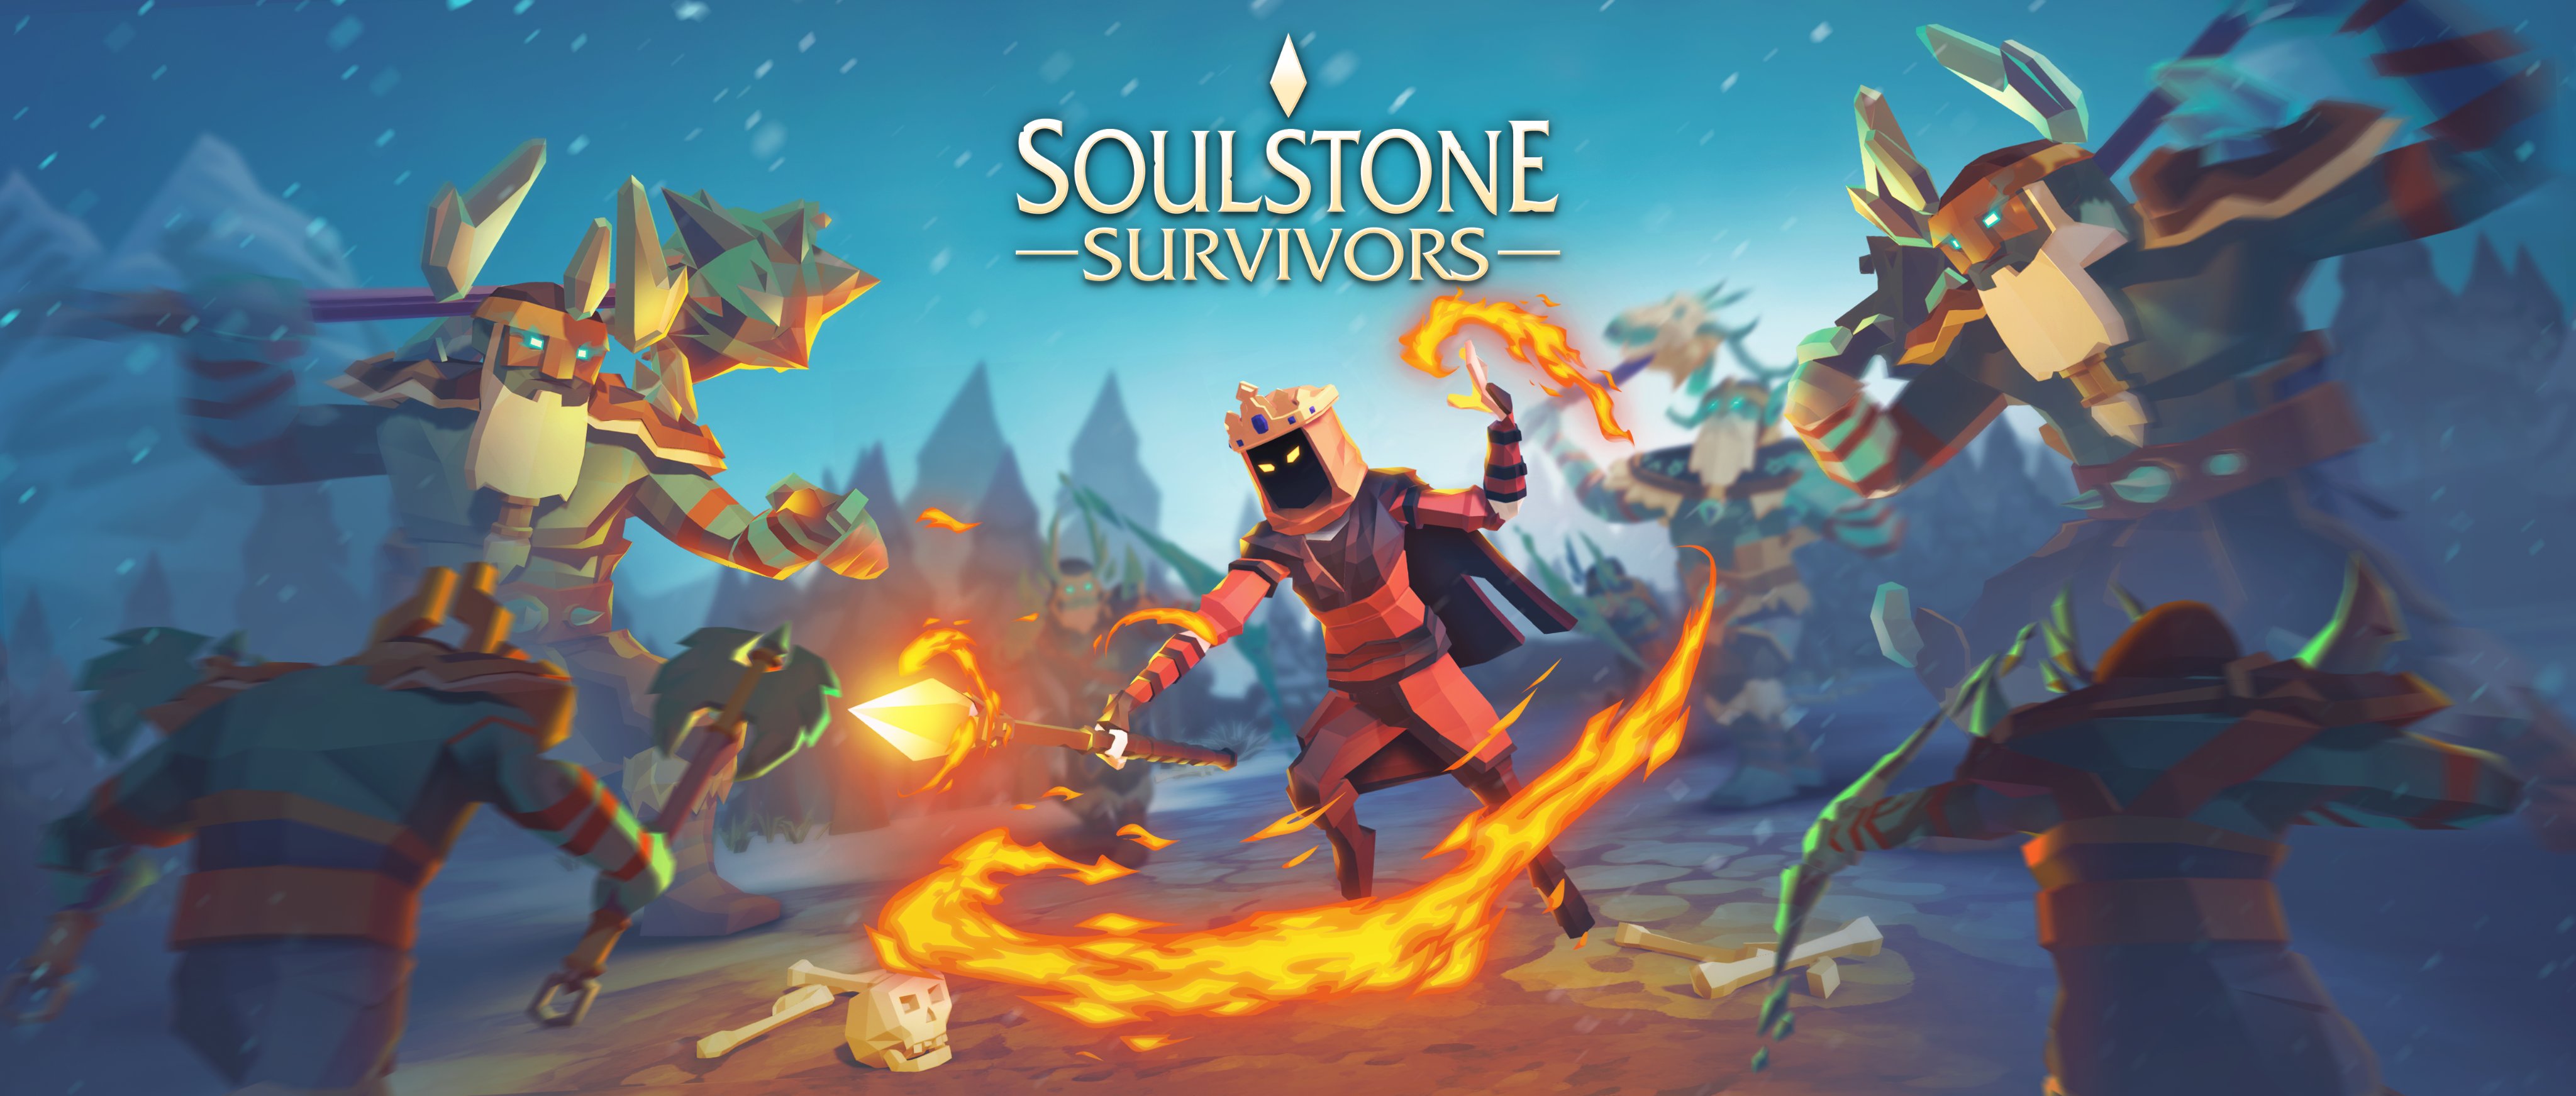 Soulstone Survivors - Game Smithing - GDWC - The Game Development